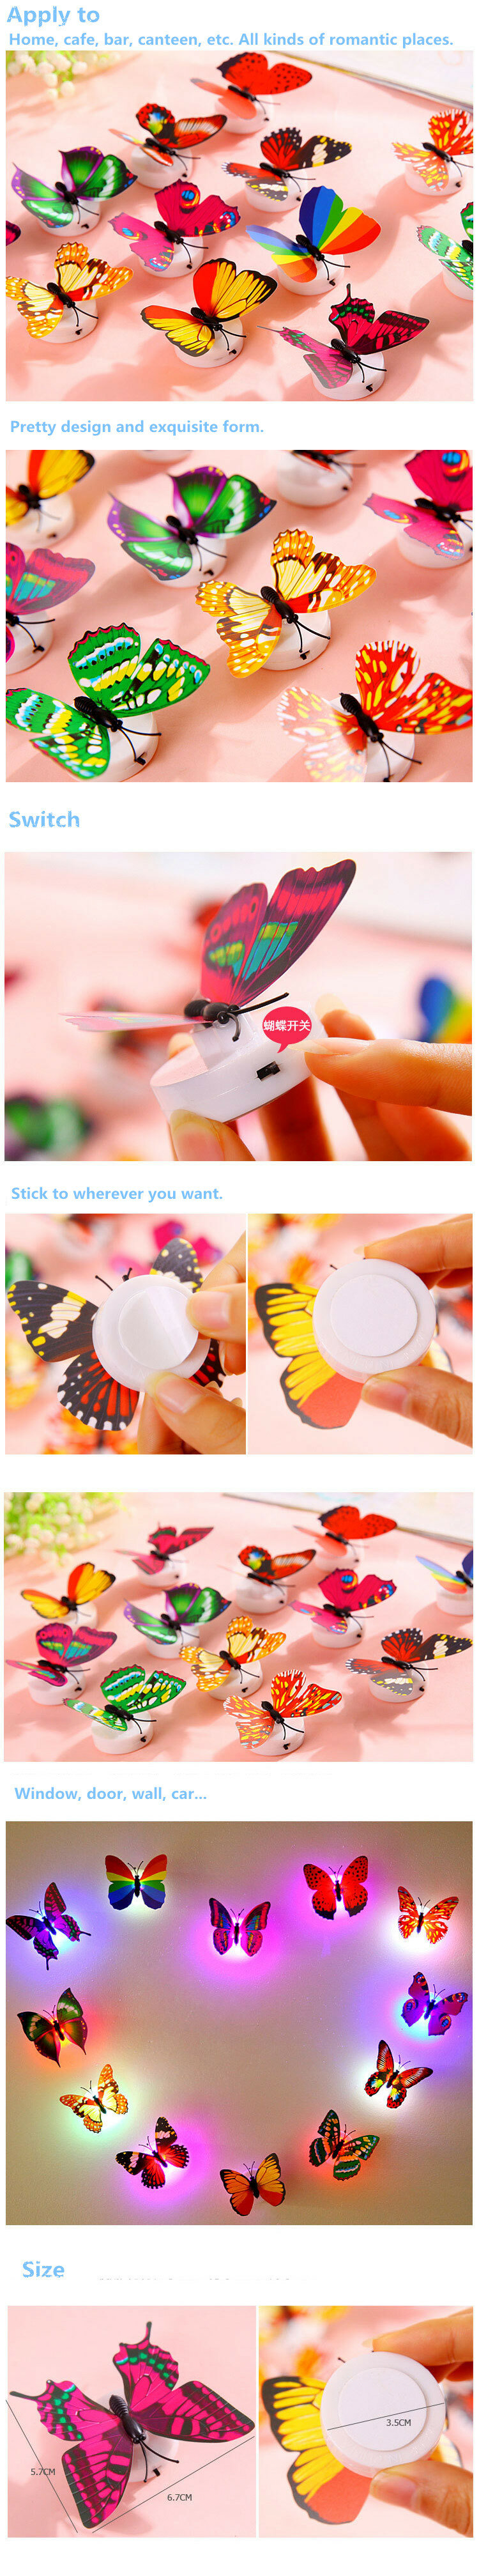 Colors Changing LED Butterfly Night Light